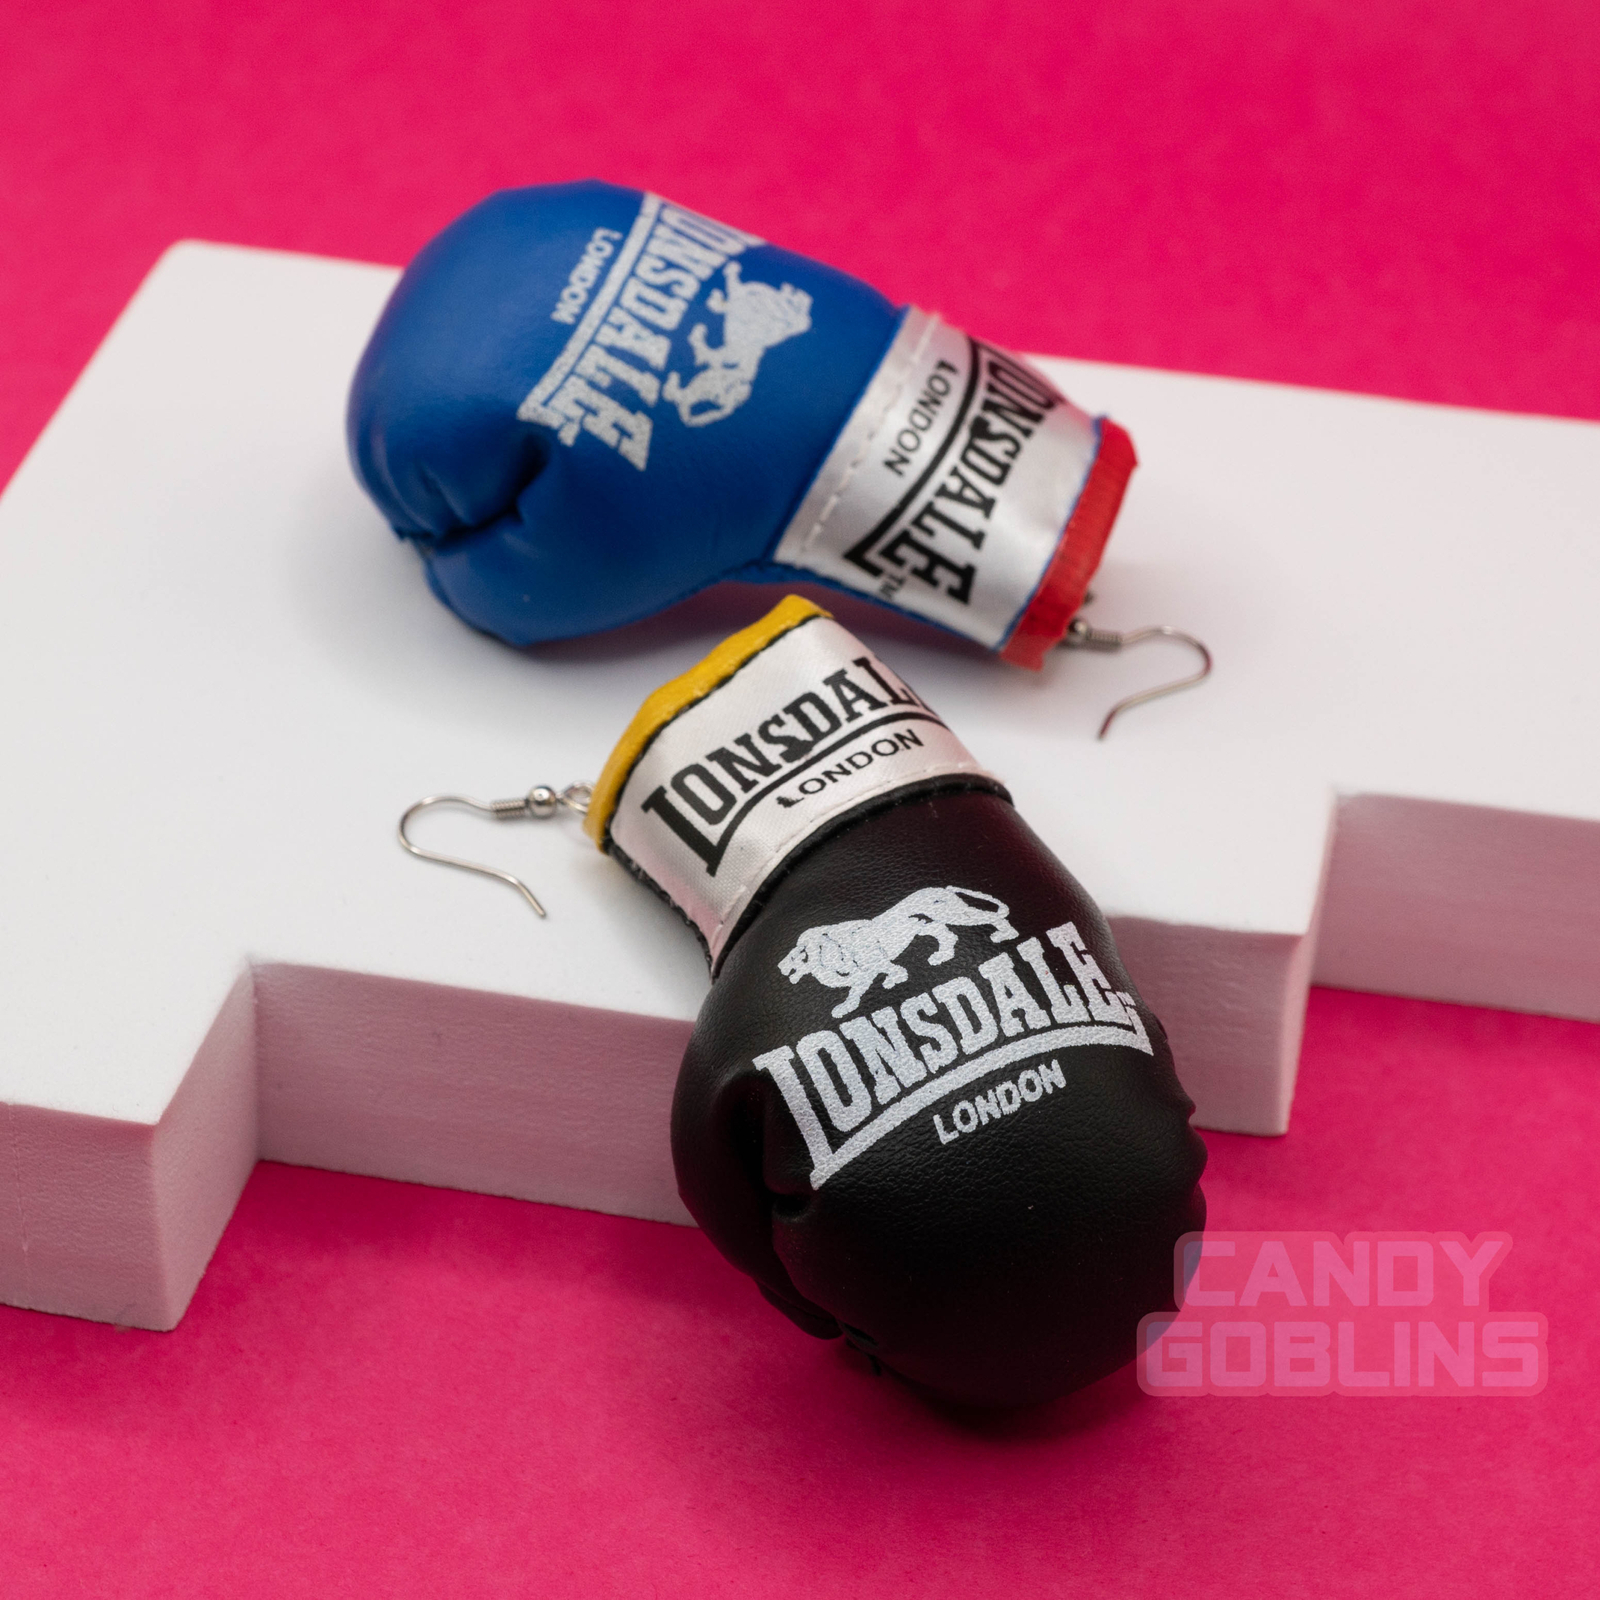 Boxing Glove Earrings - Candy Goblins